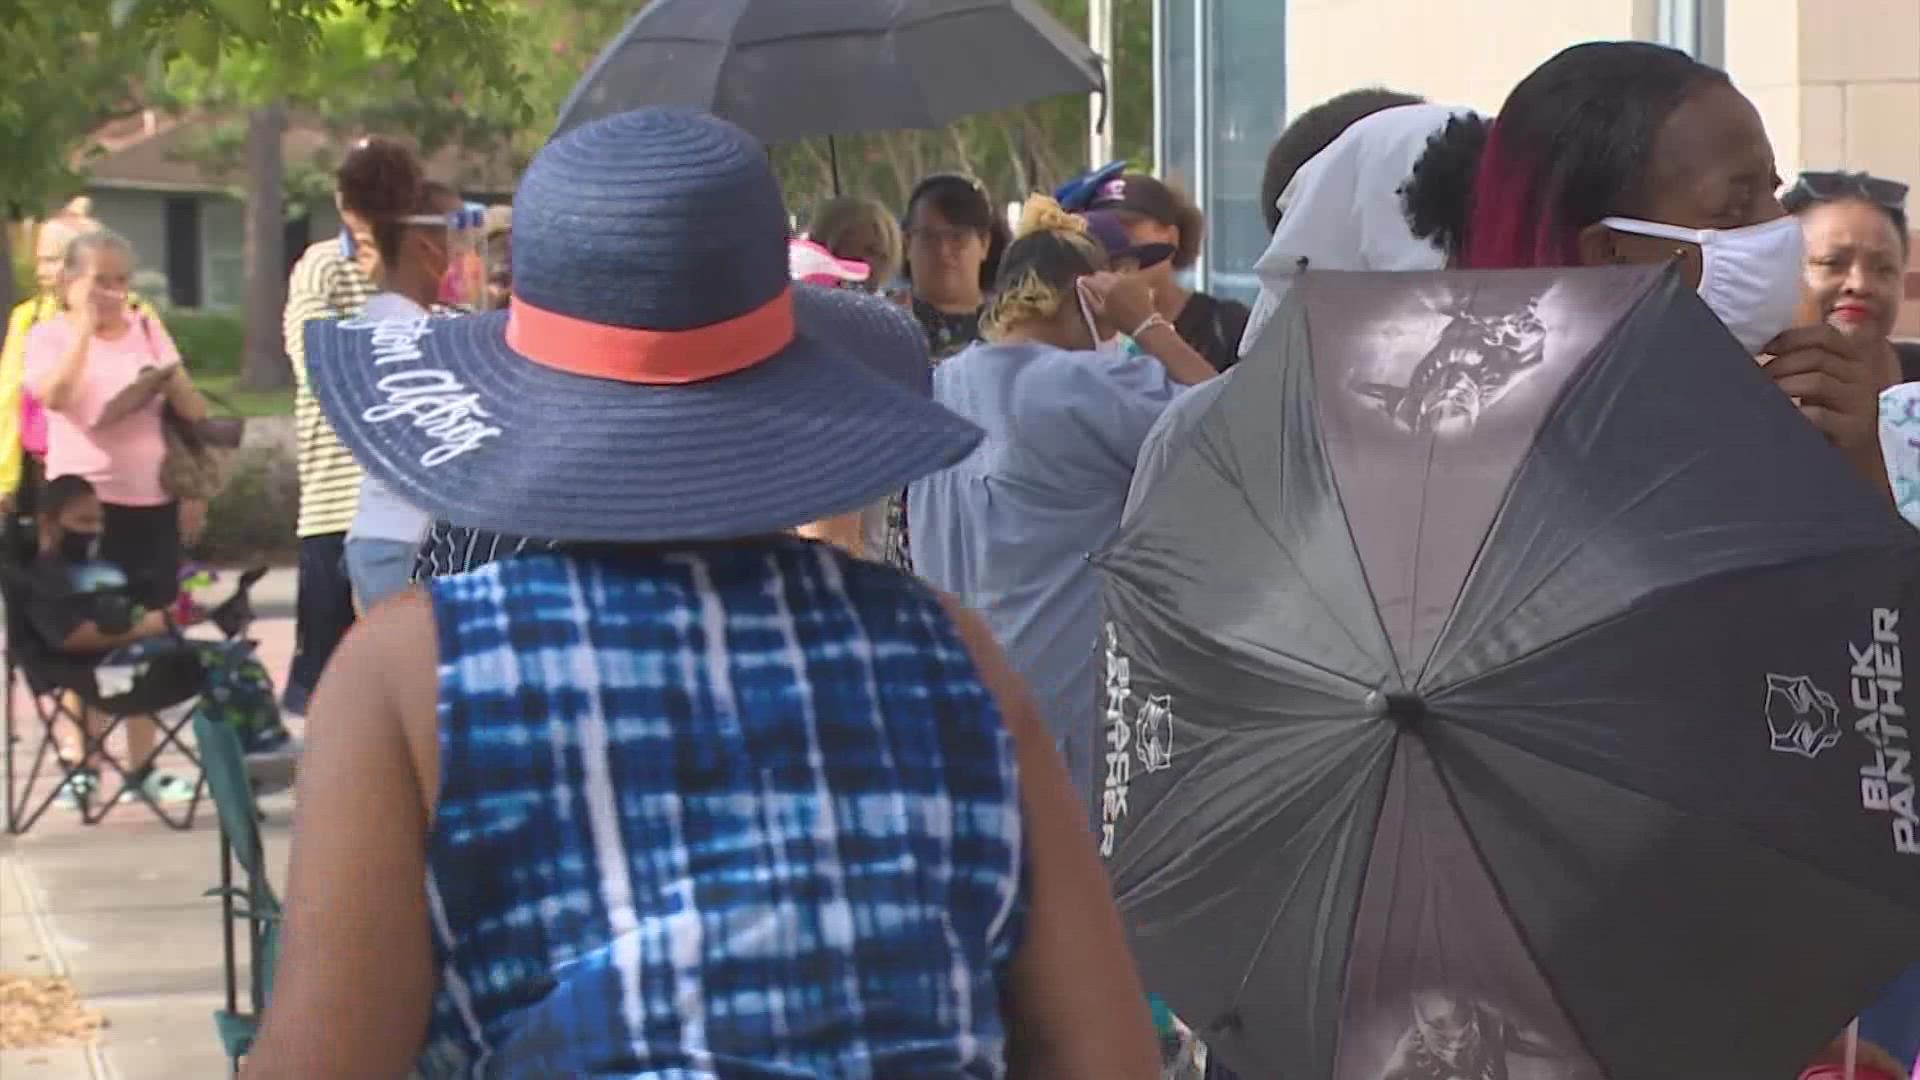 Despite the heat, lines wrapped around the agency’s Aberdeen Campus, giving a glimpse at the great need for utility assistance in the Houston area.